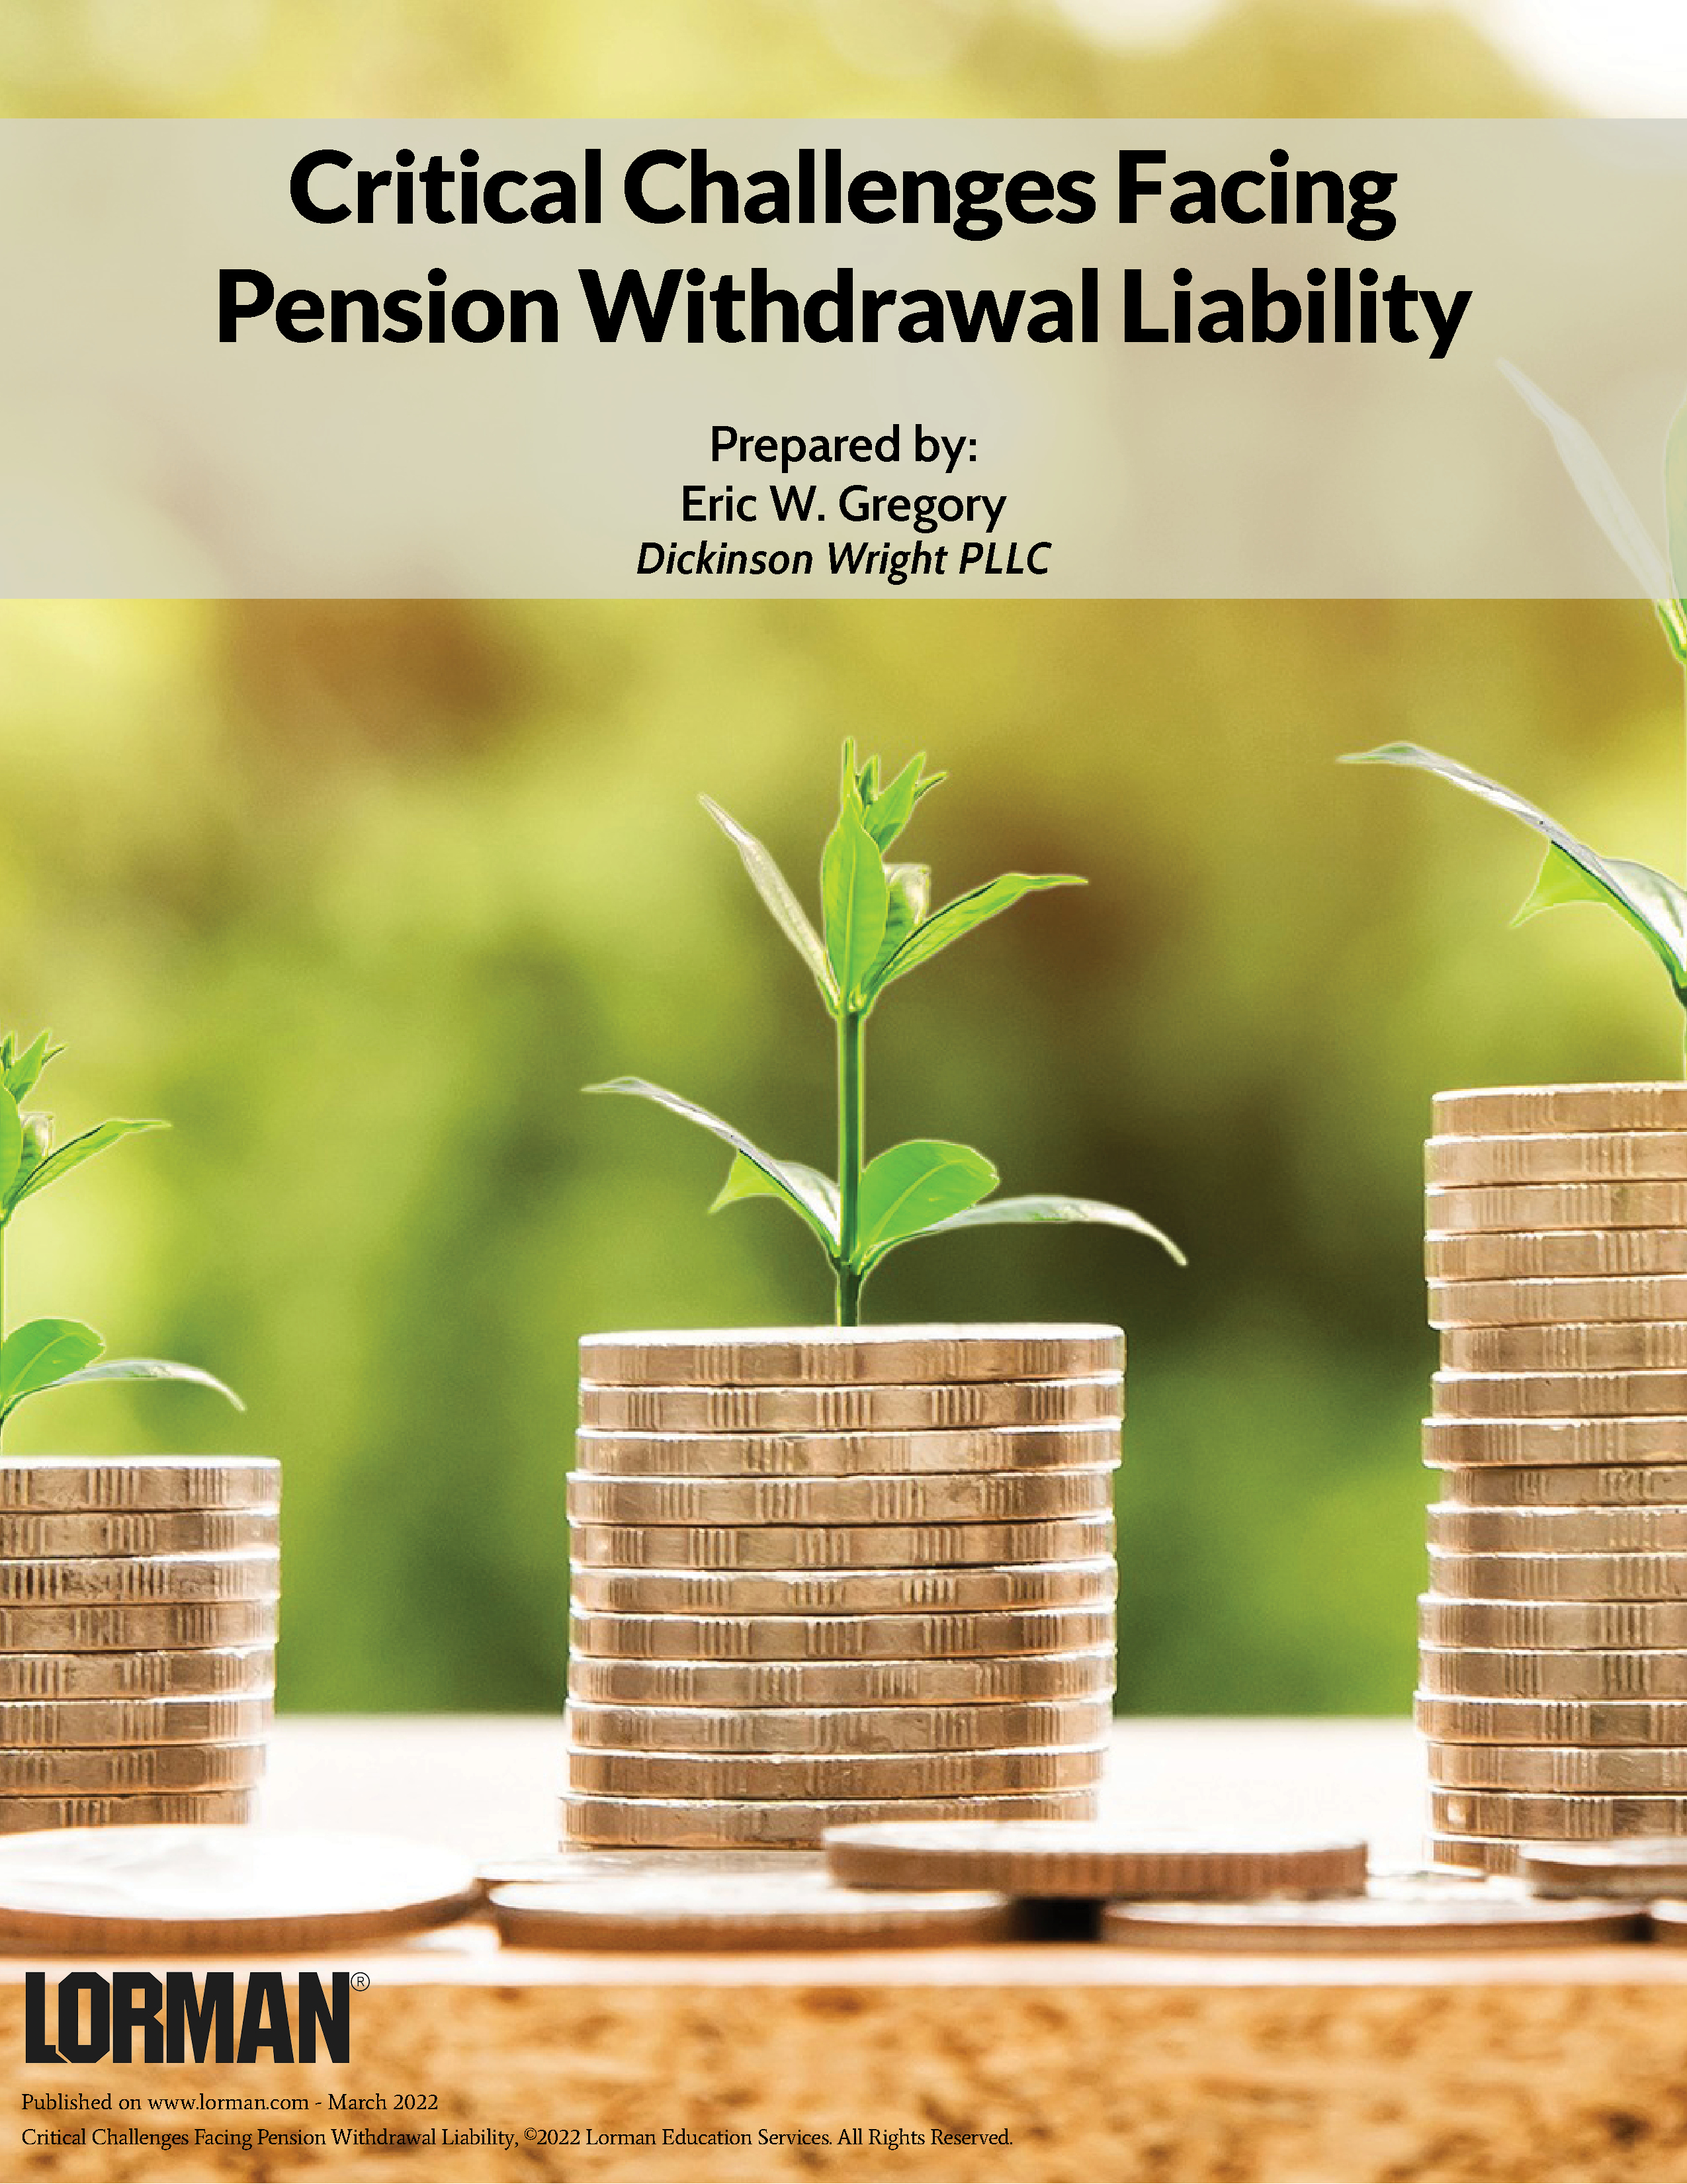 Critical Challenges Facing Pension Withdrawal Liability